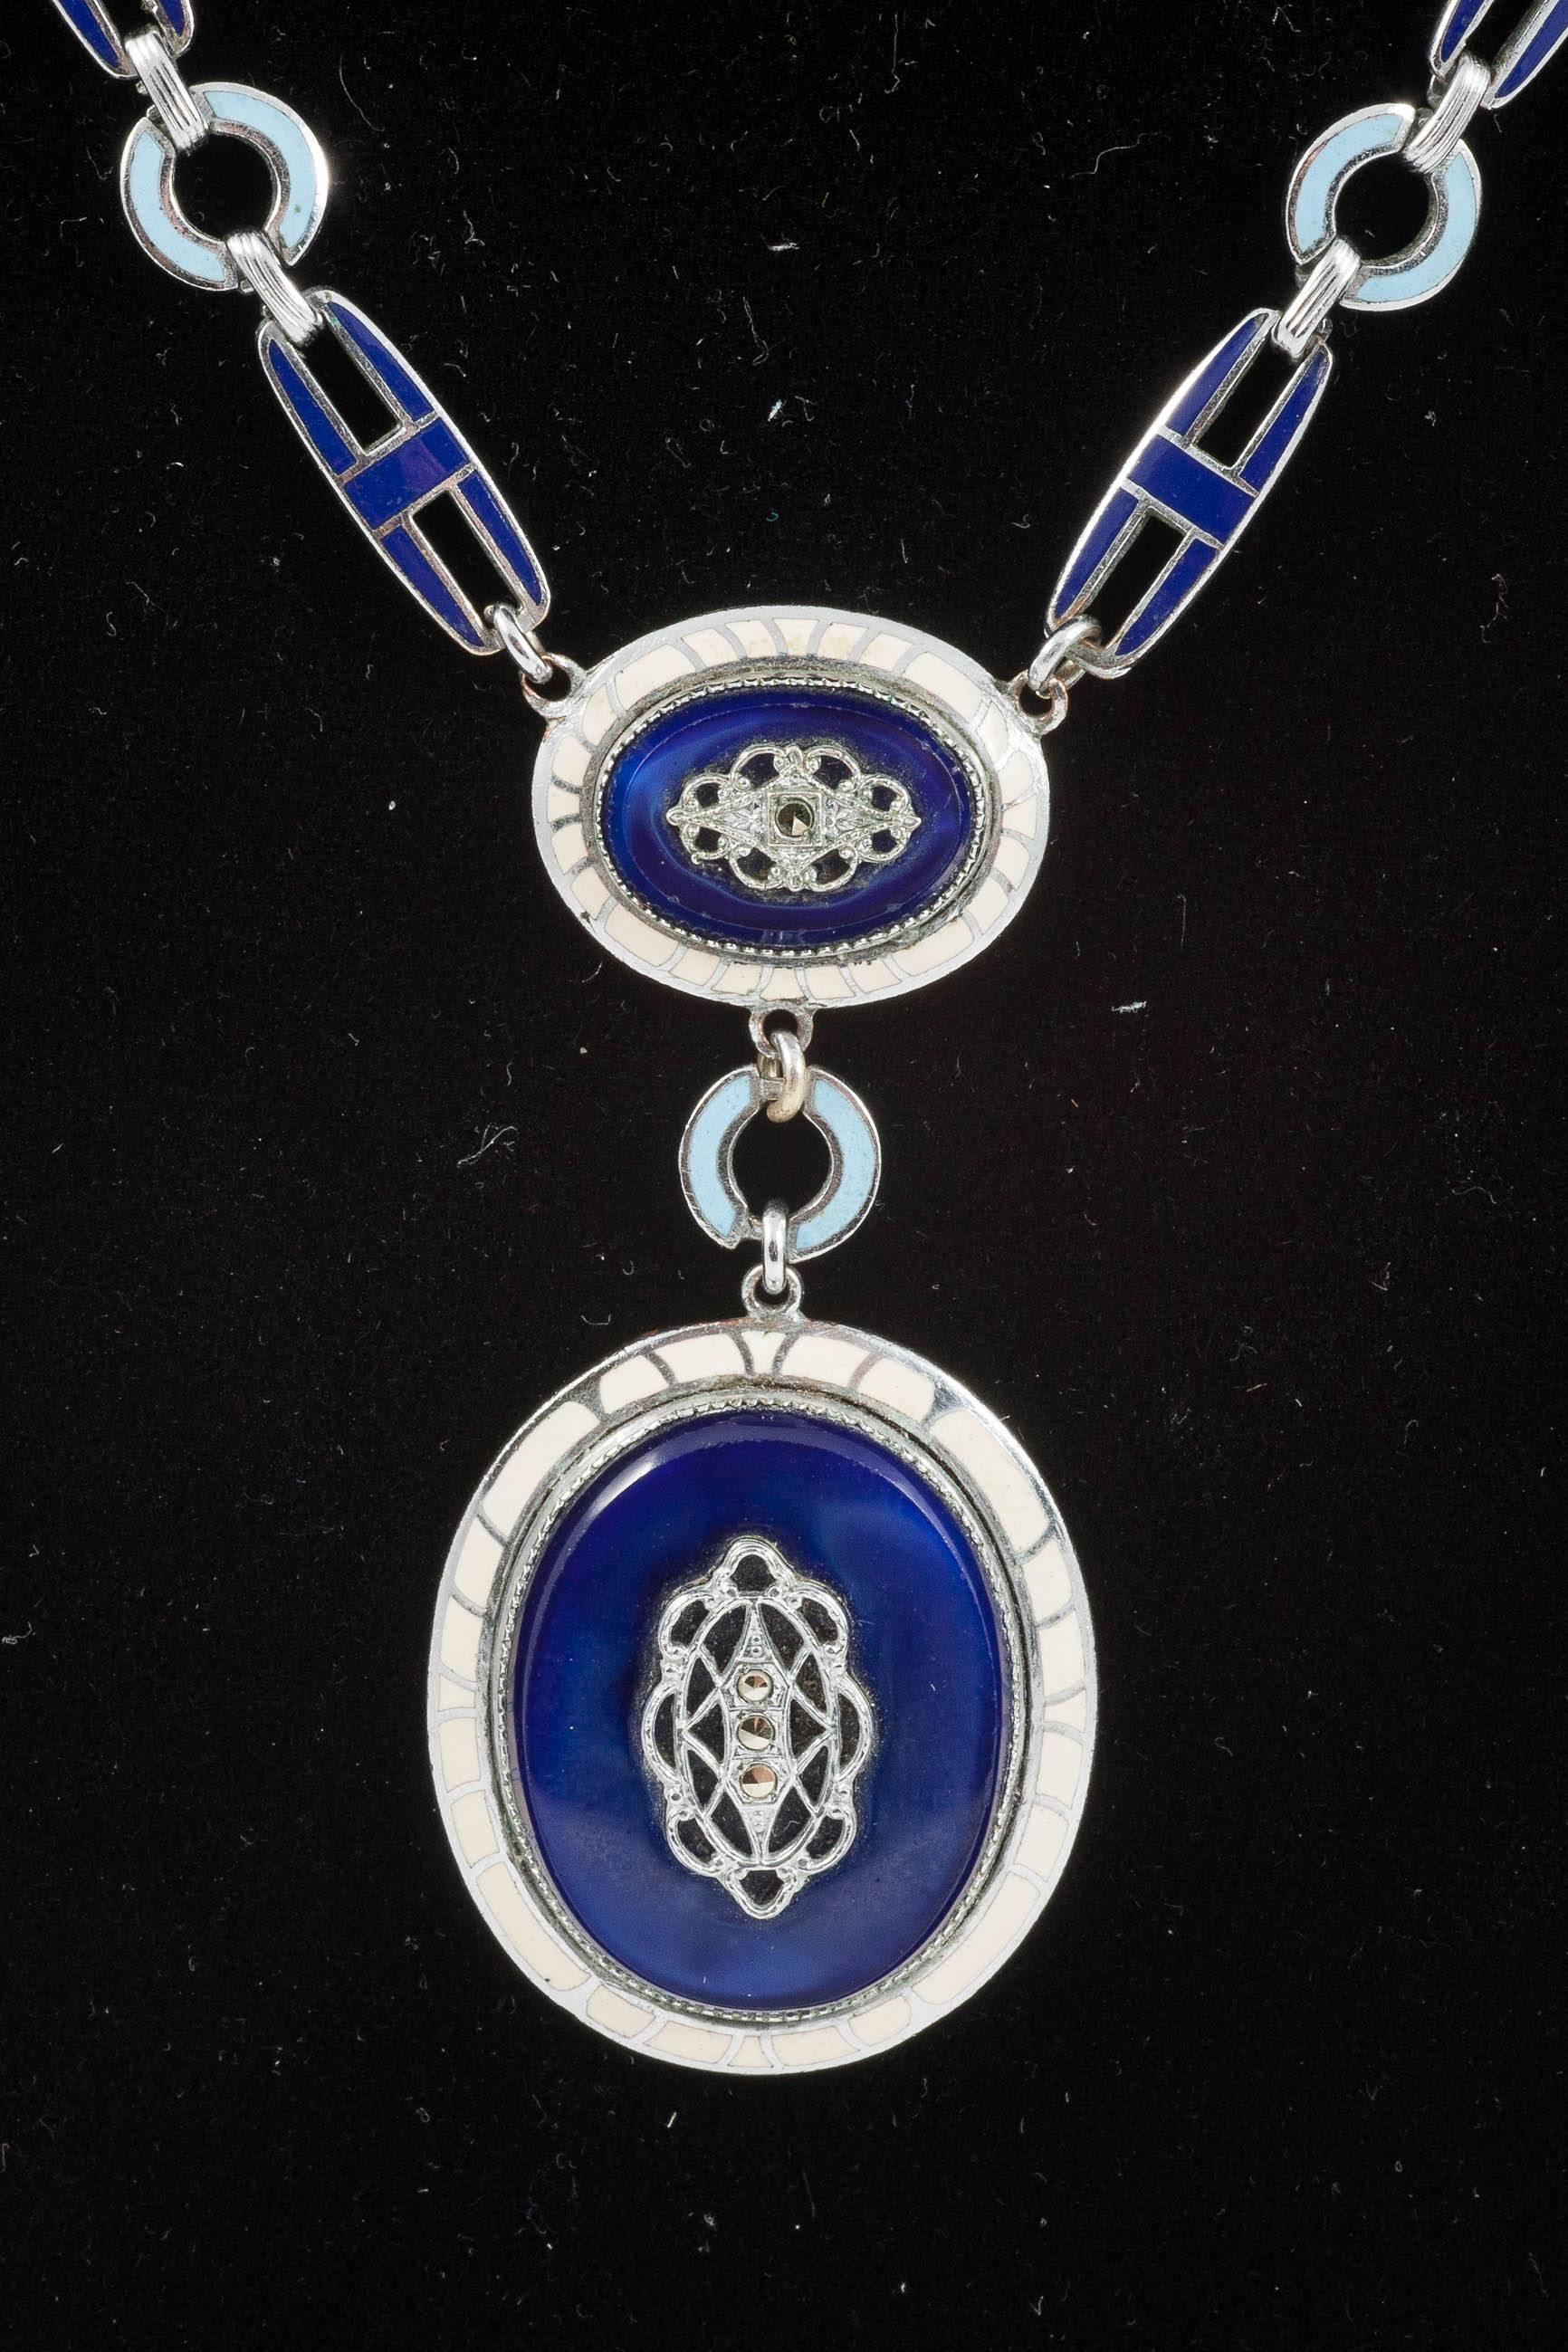 This is a really smart Deco pendant, each link is enameled in navy blue and pale blue. The double pendant is framed in a lovely cream enamel, and it has a cut steel panel attached to the glass plaques that look like Lapis Lazuli.
I think it would be